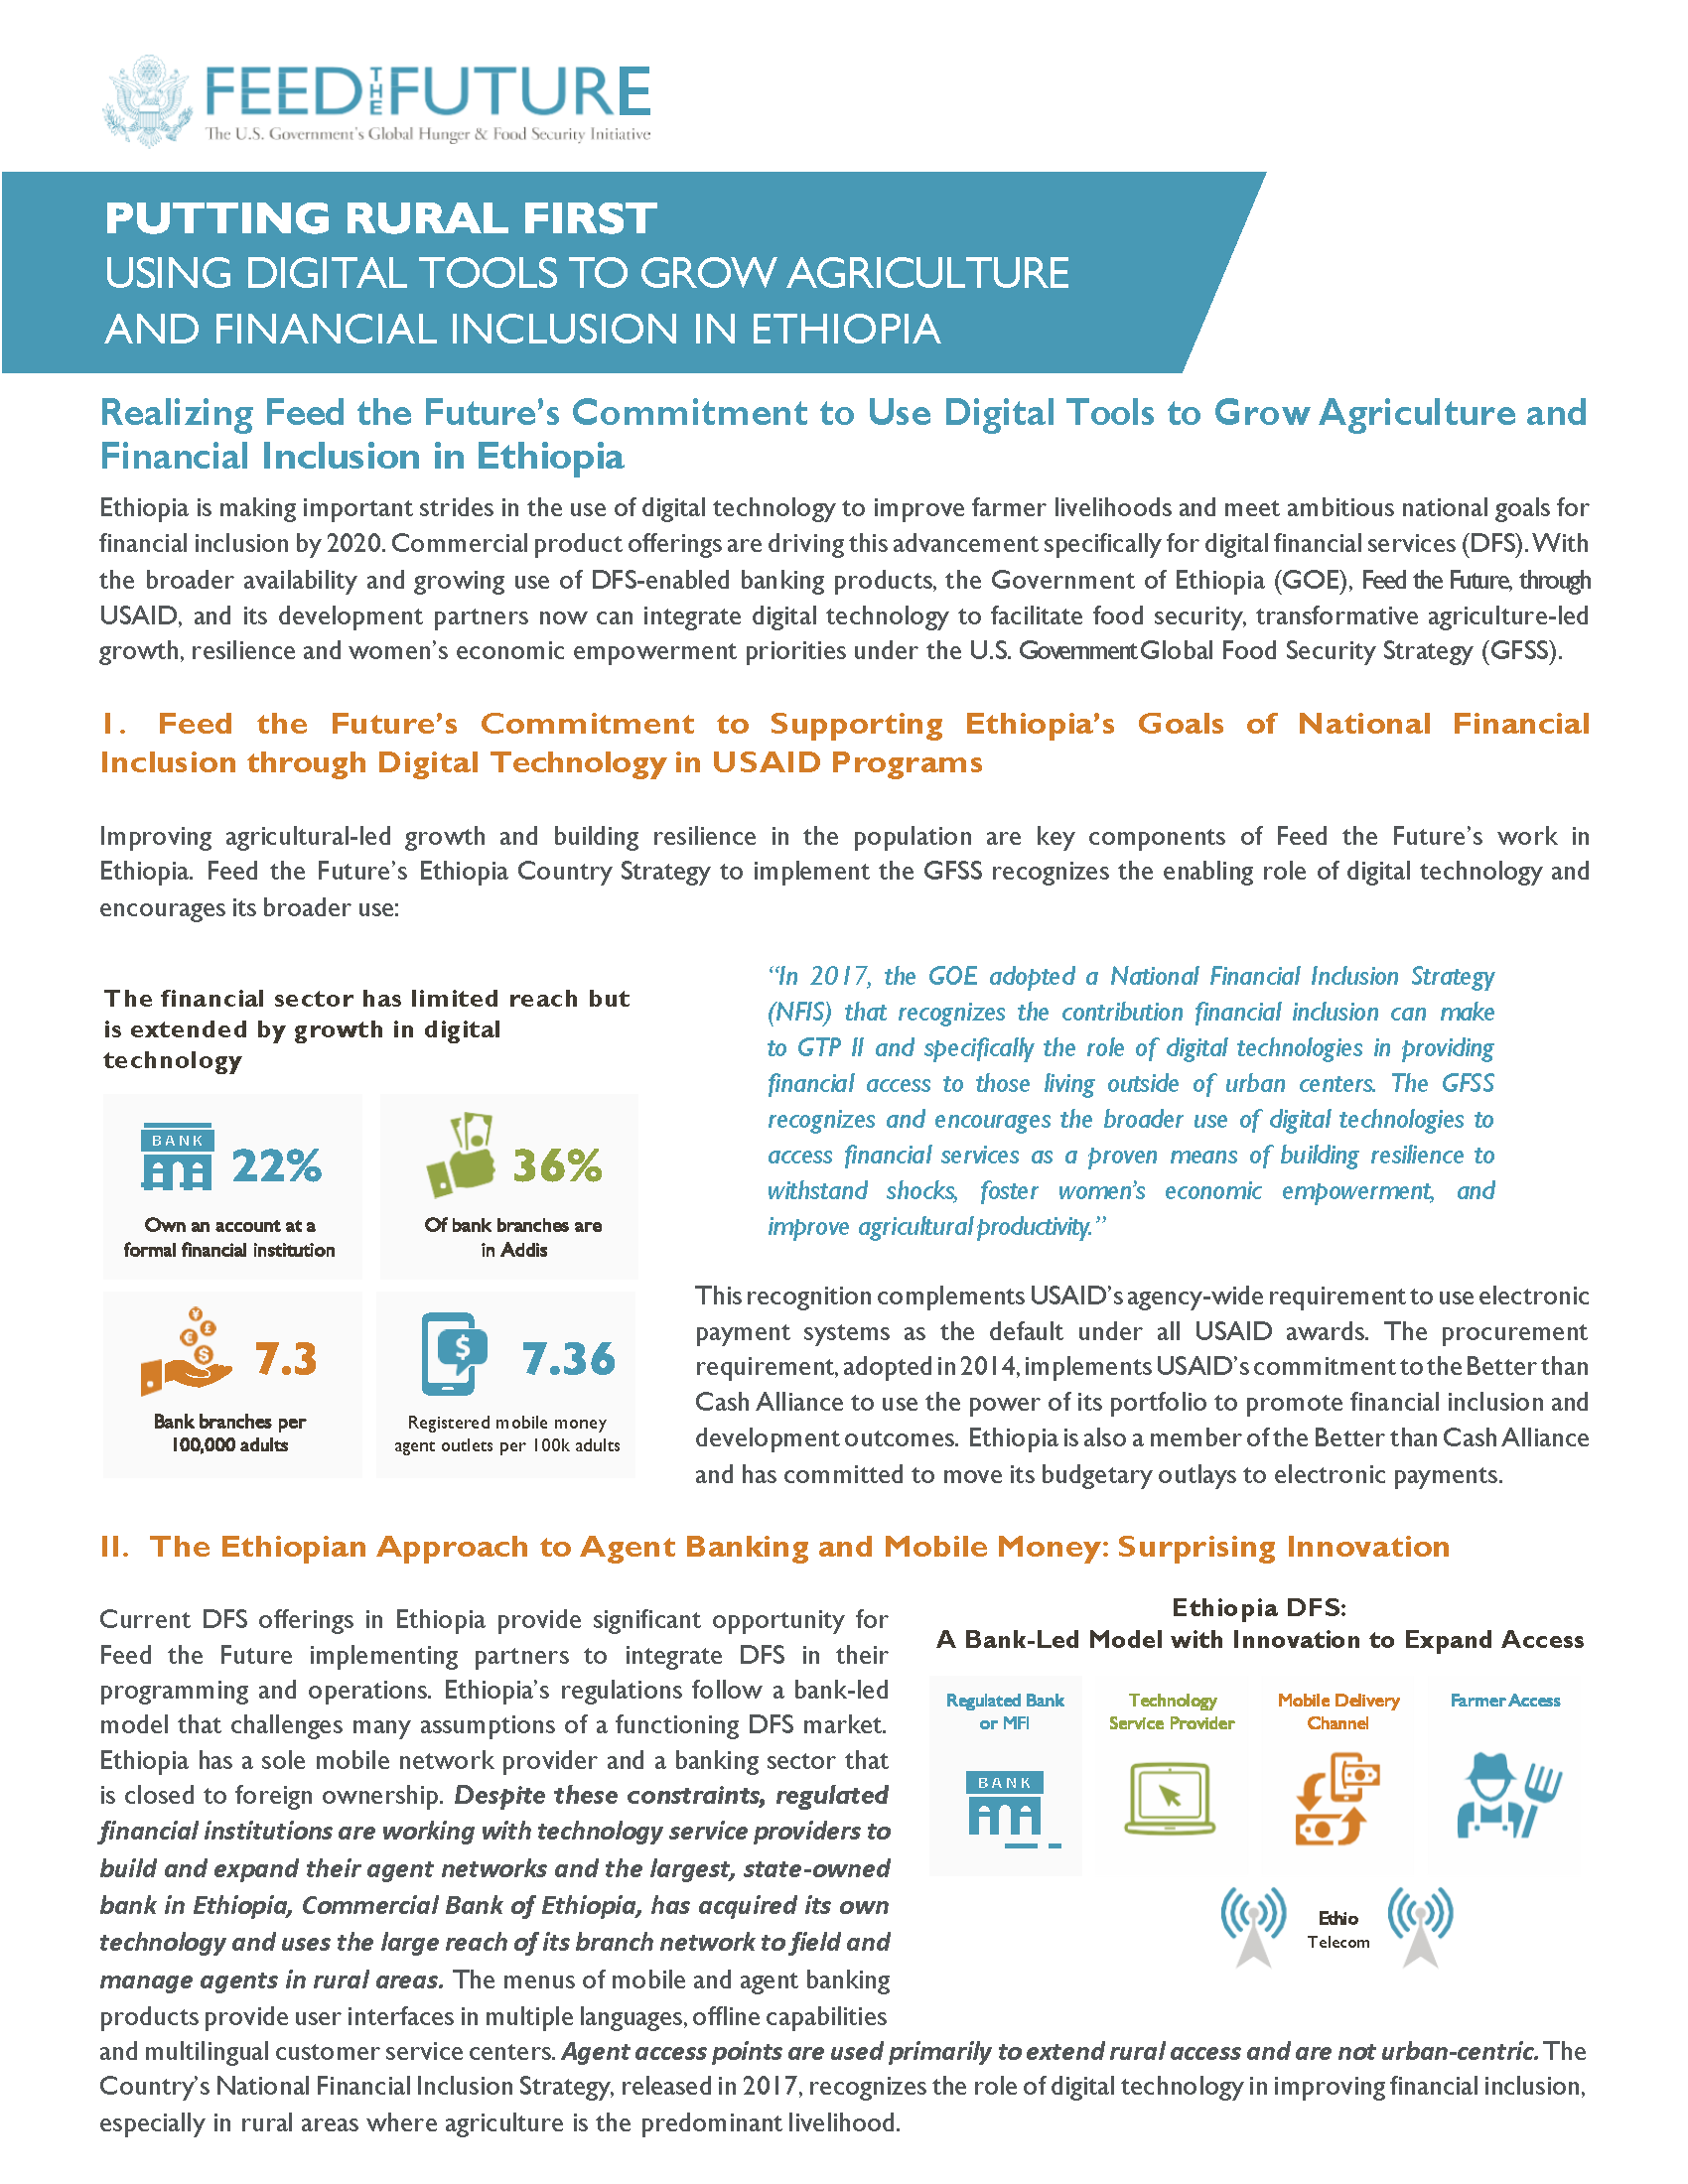 Fact Sheet: Using Digital Tools to Grow Agriculture and Financial Inclusion in Ethiopia